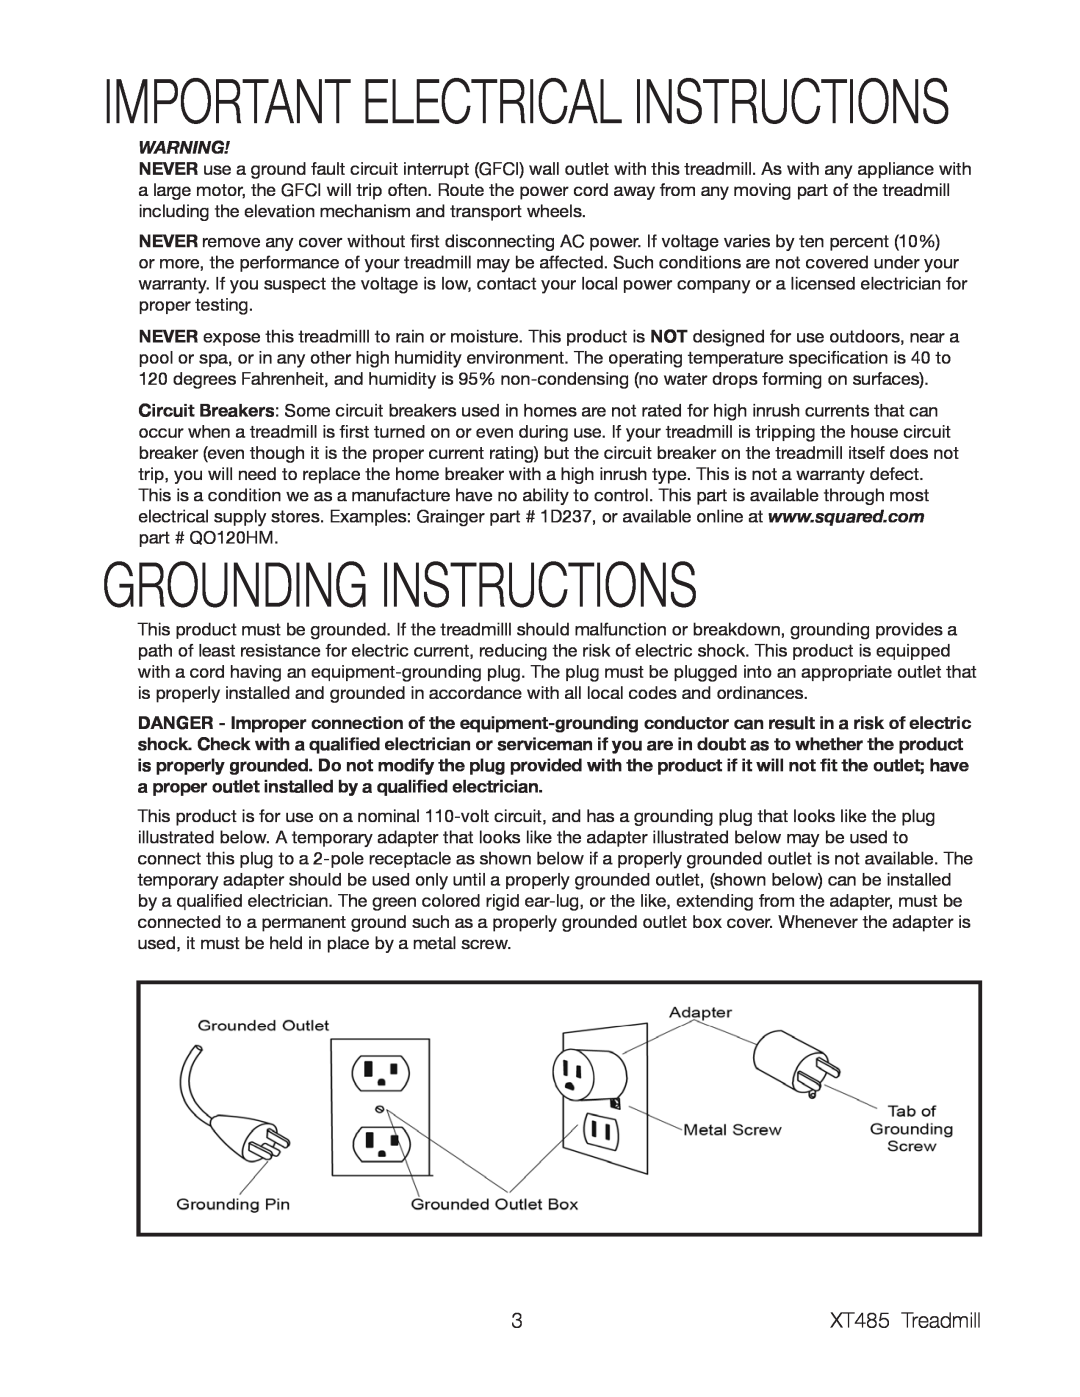 Spirit XT485 owner manual Grounding Instructions, Important Electrical Instructions 